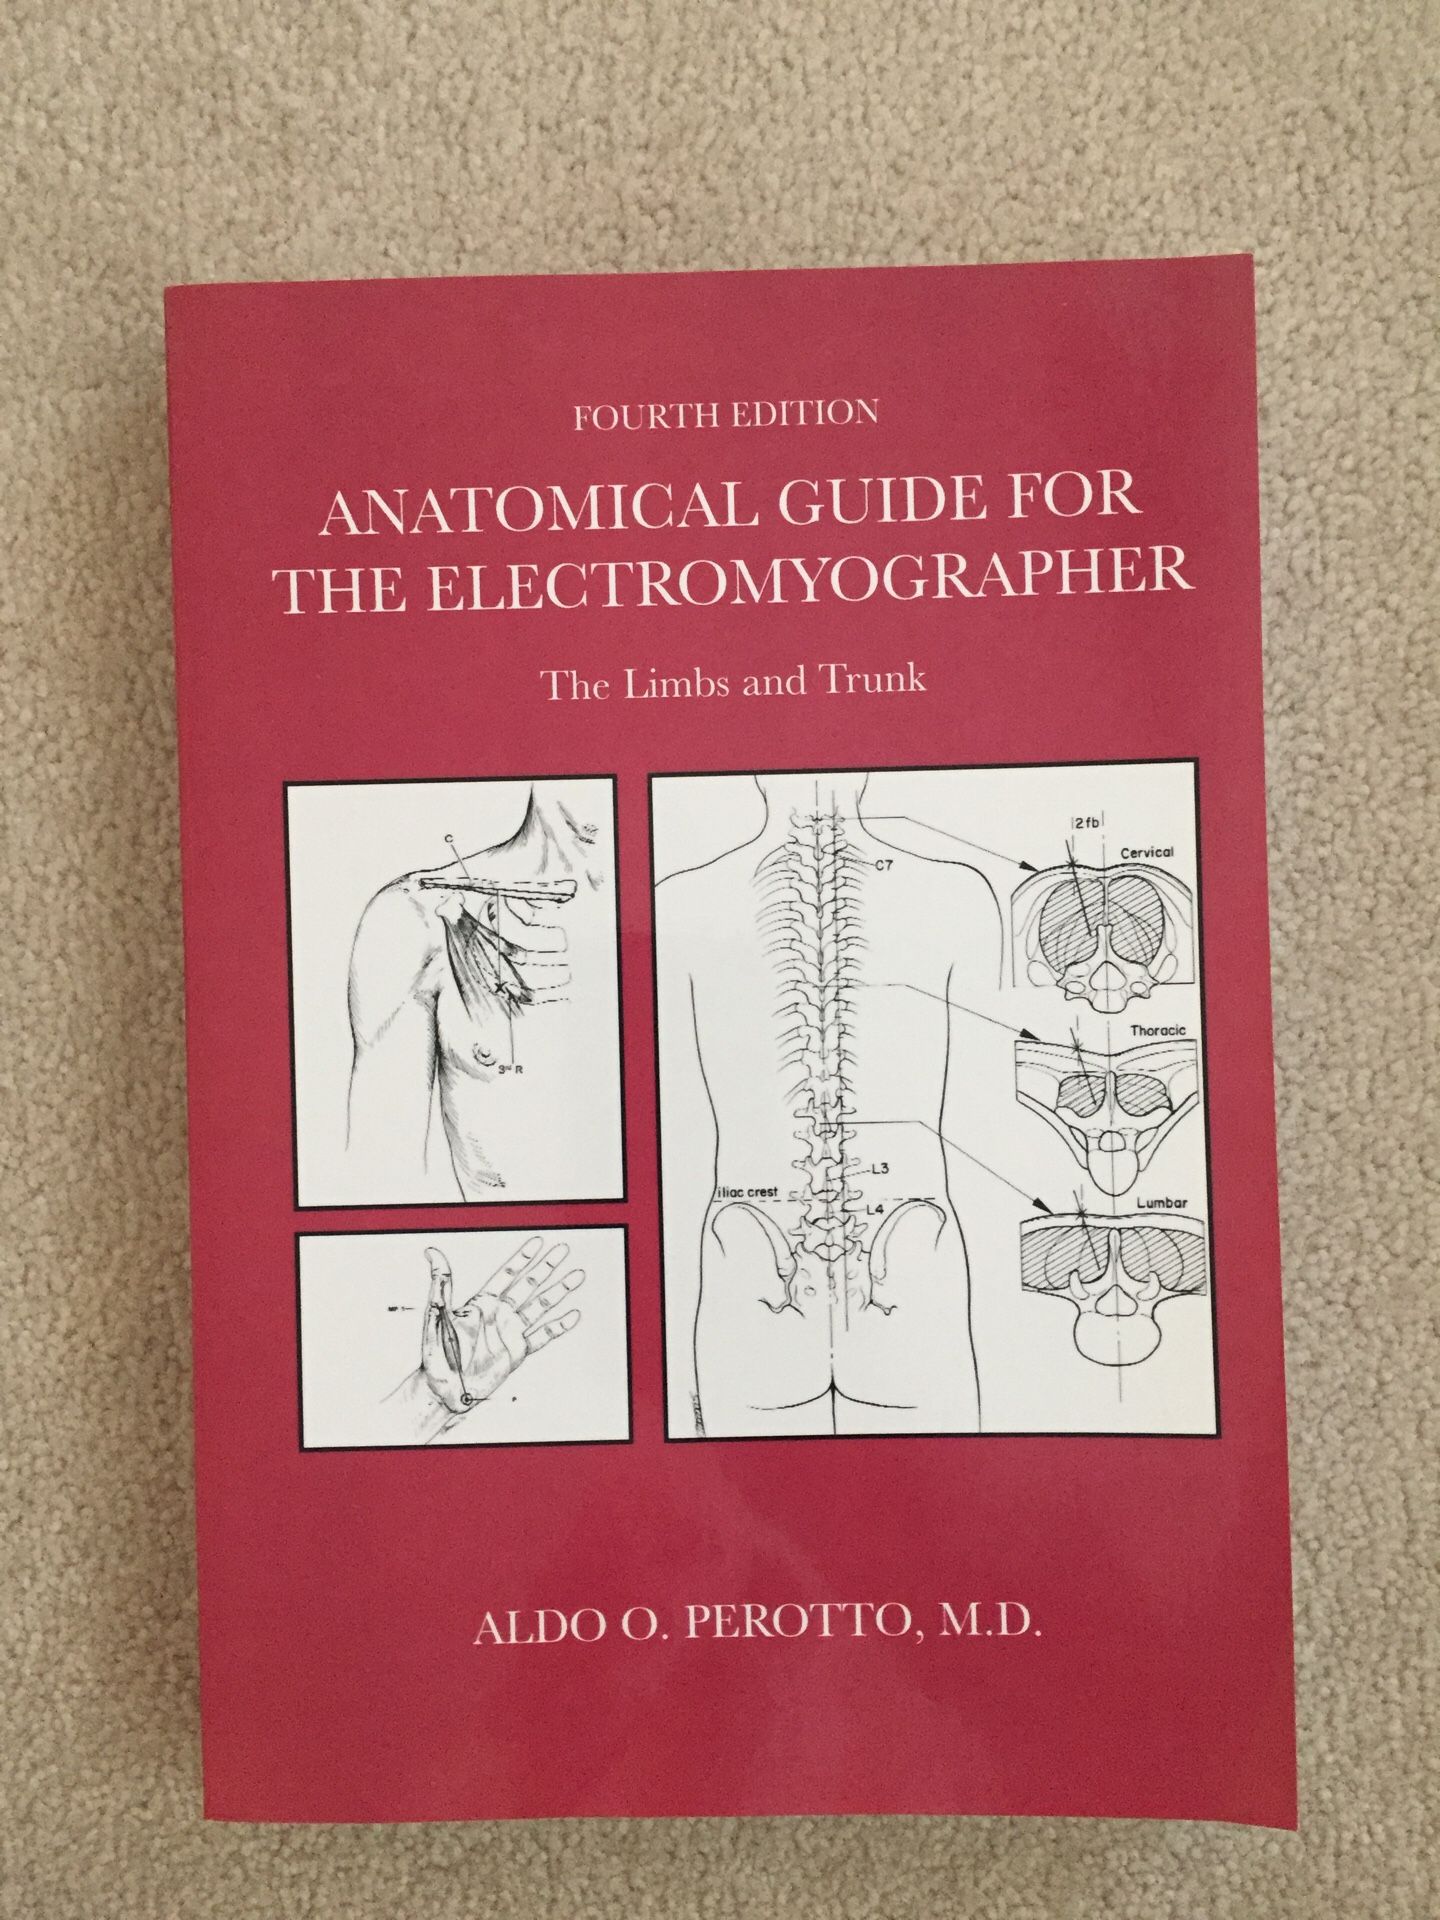 Anatomical guide for the electromyographer. Mint condition.